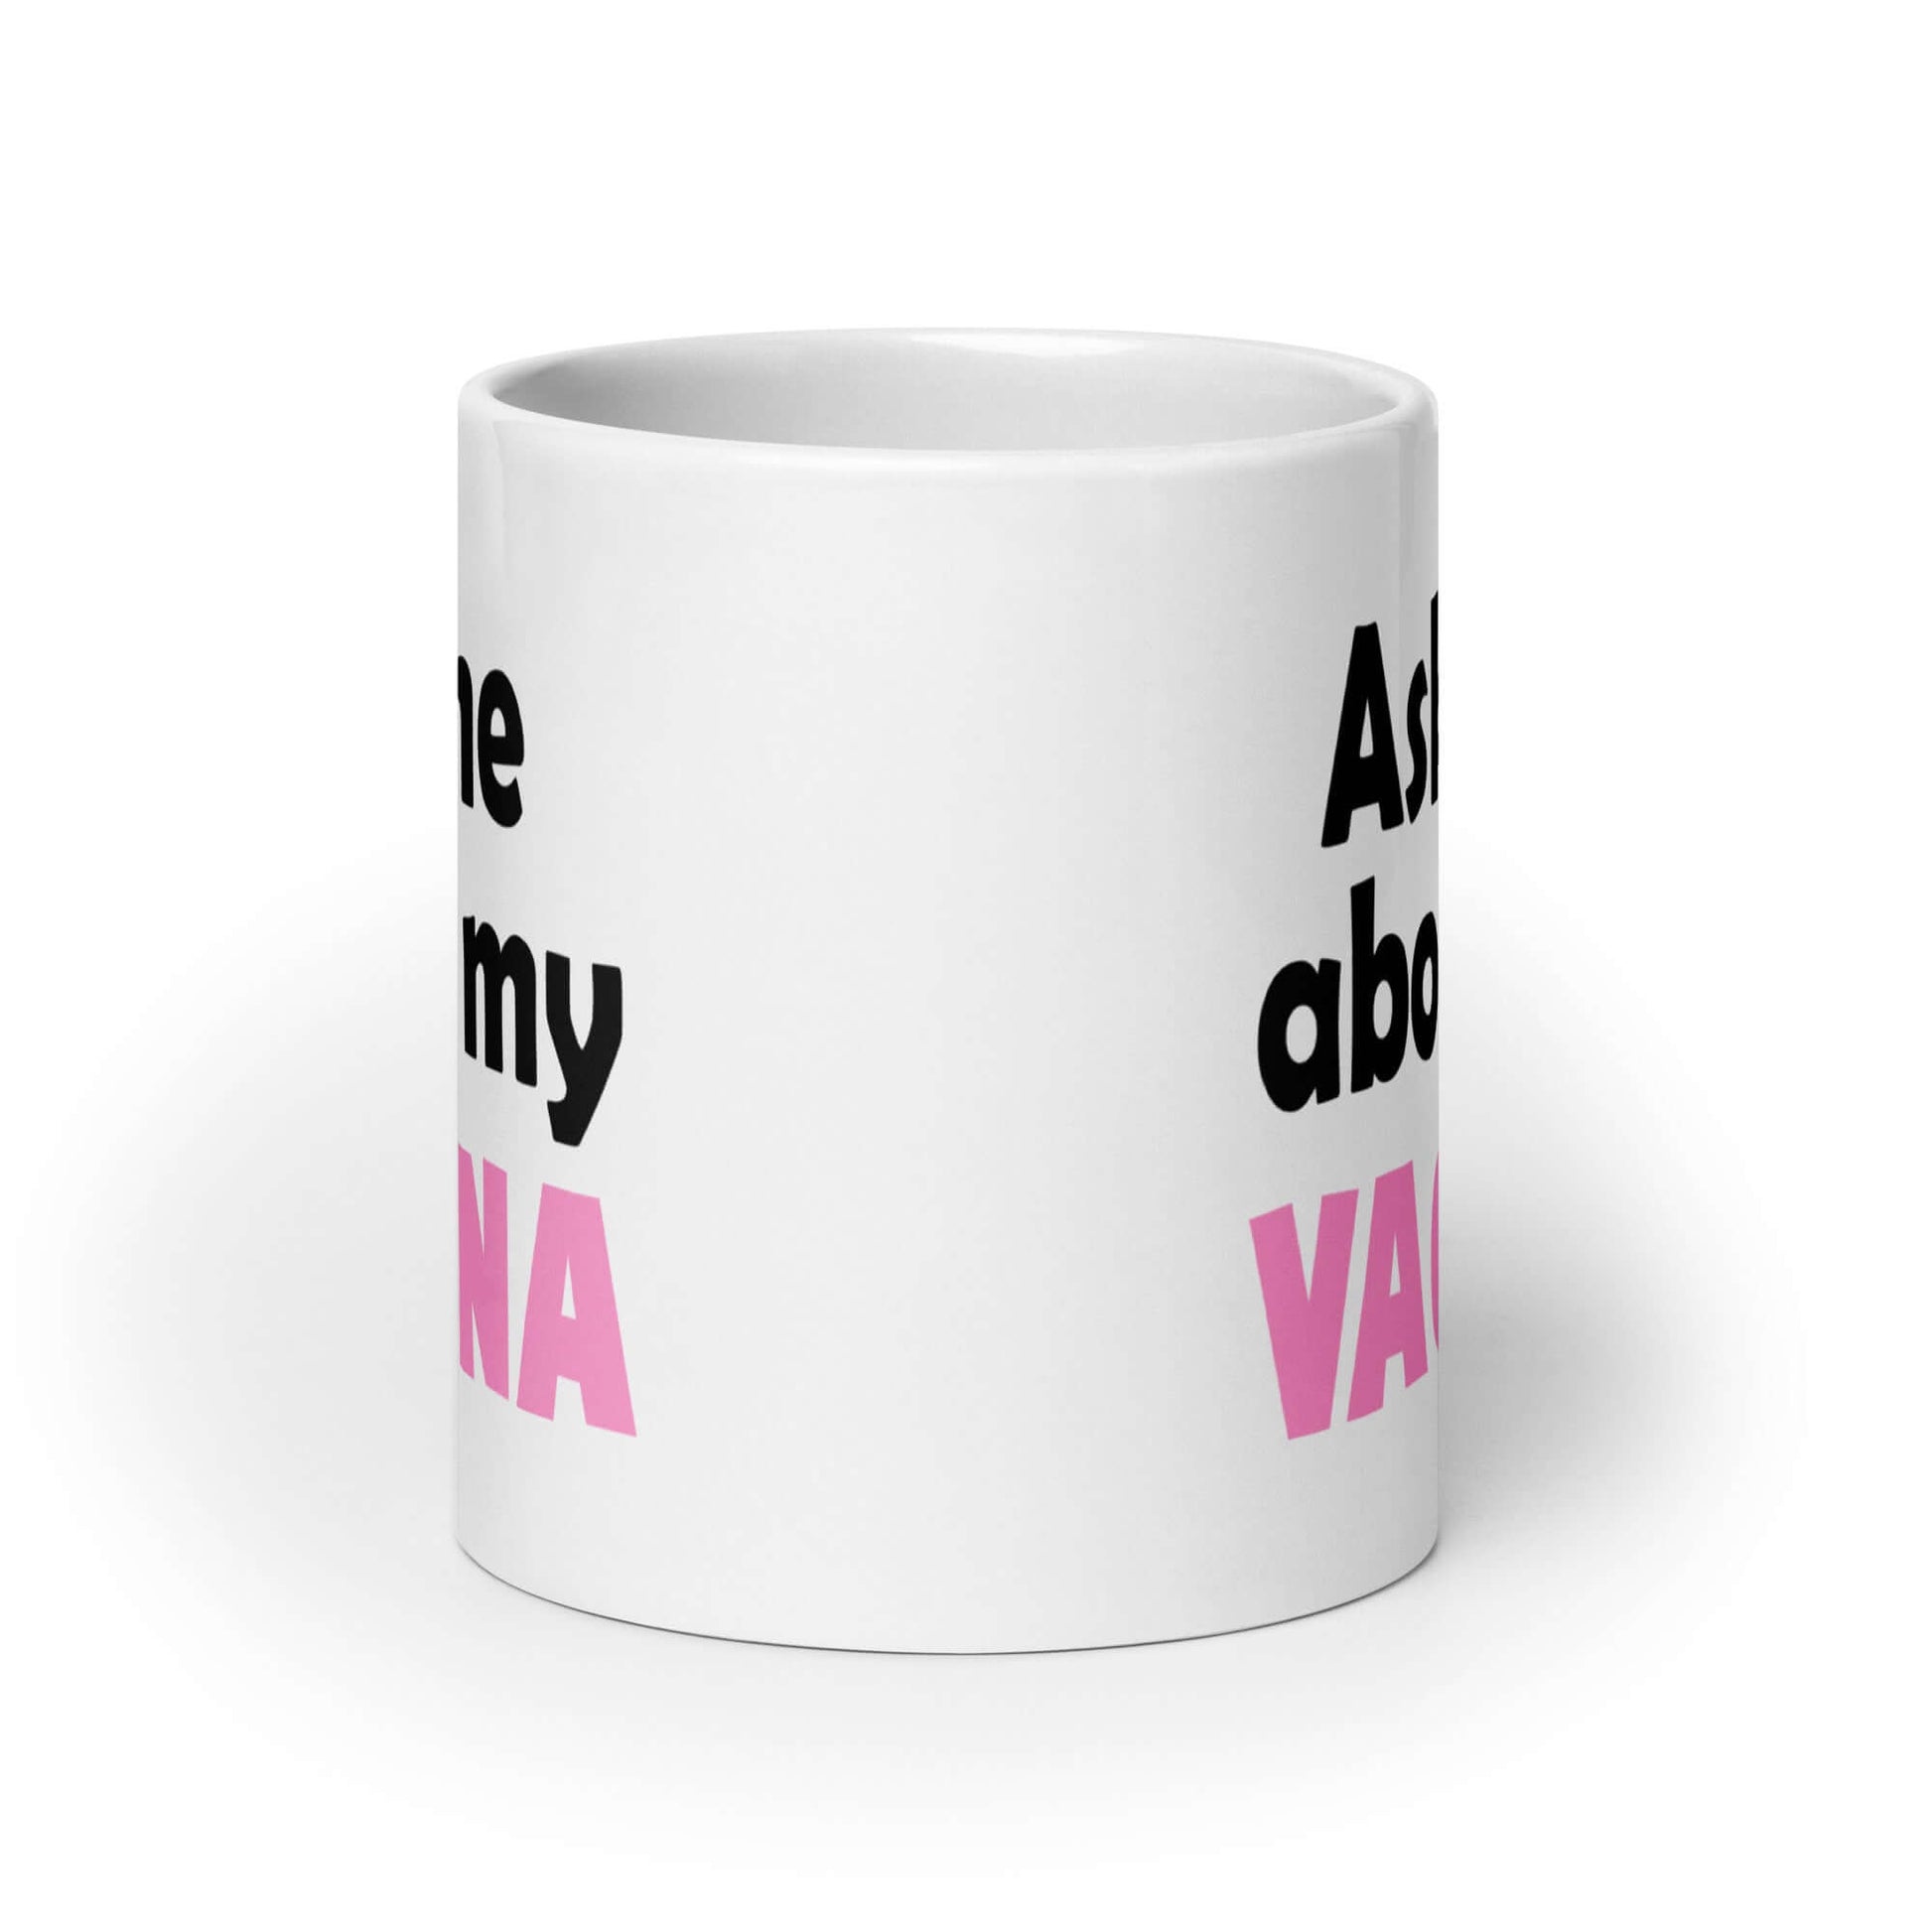 White ceramic mug with the words Ask me about my vagina printed on both sides. The word vagina is printed in pink. The rest of the text is black.